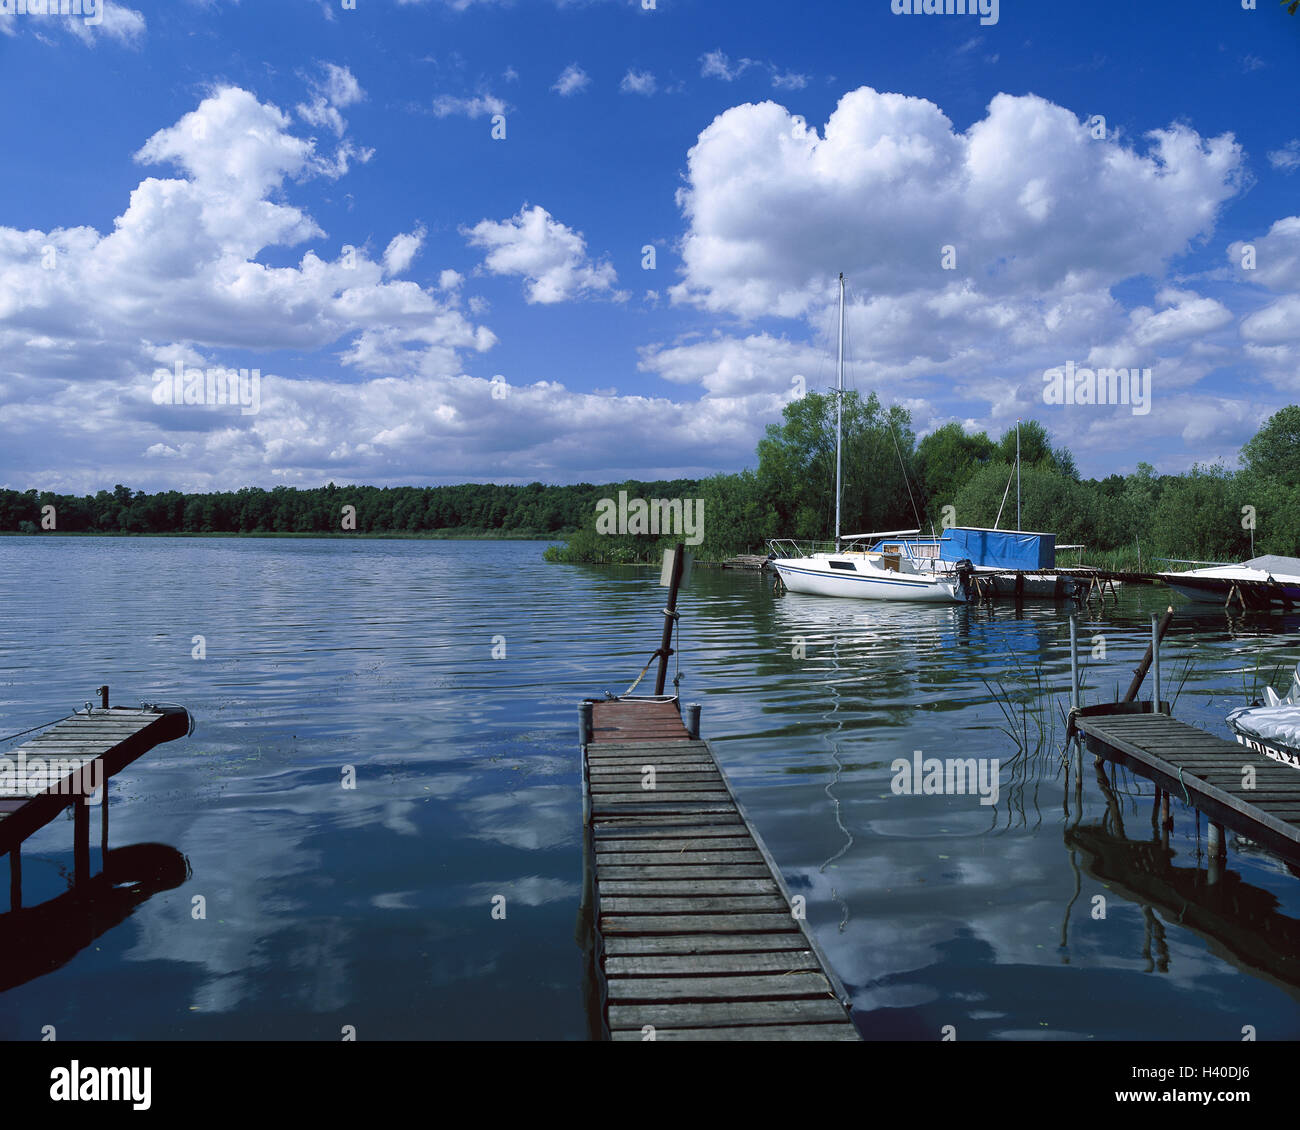 Germany, Brandenburg, crust moor, skirmish lake, wooden jetty, boots, Europe, Ruppiner country, recreation area, lake, bridges, landing stages, sailboats, heavens, clouds, cloudy skies Stock Photo